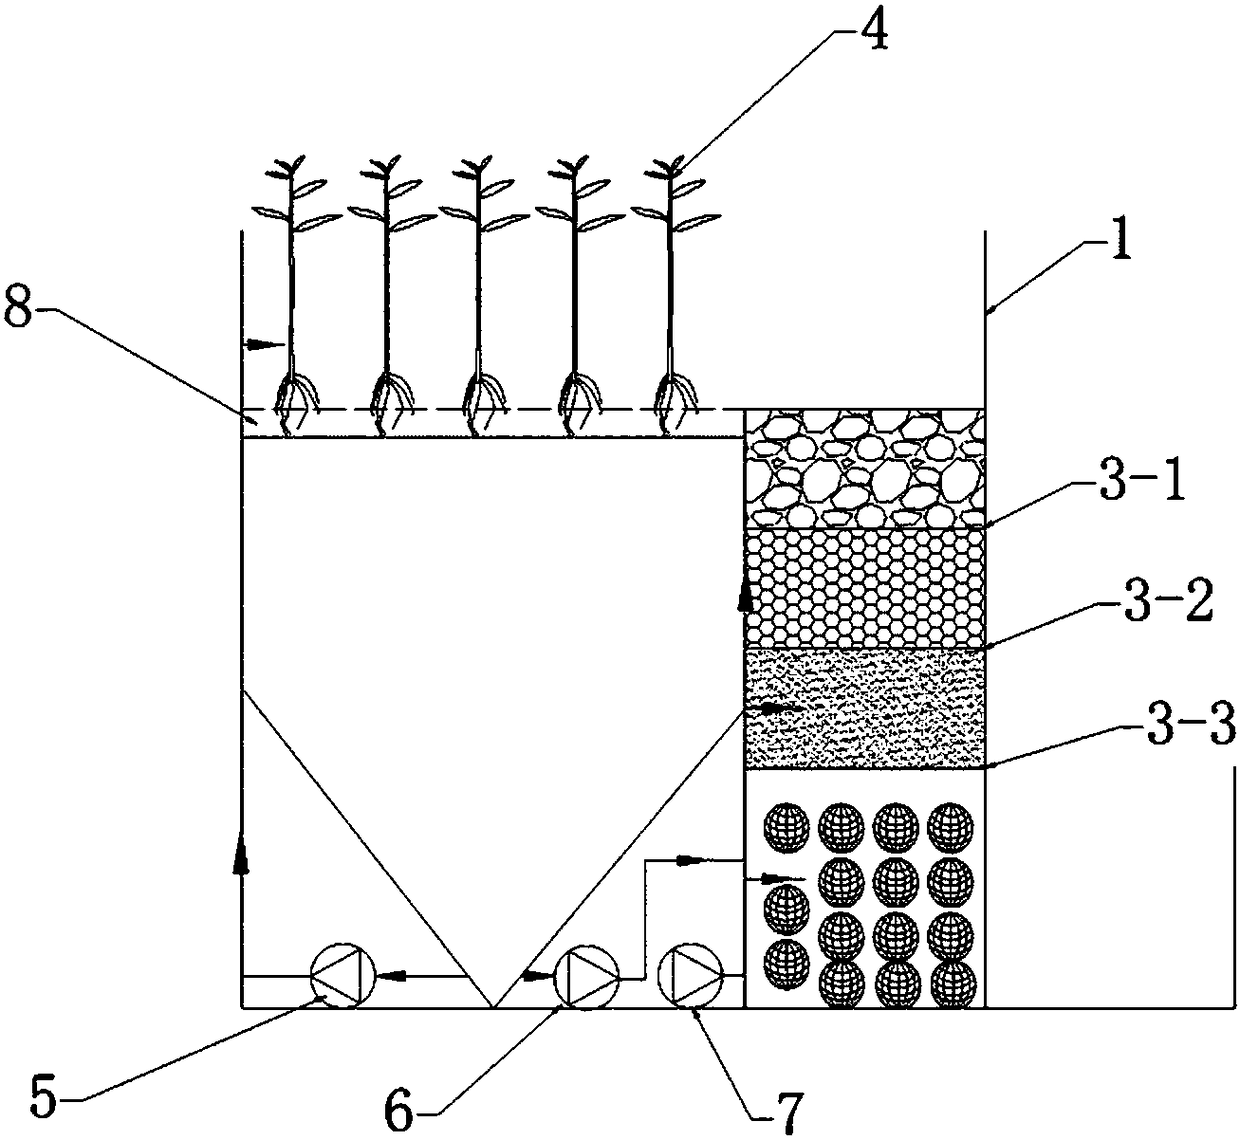 Integral stereoscopic wetland wastewater treatment effluent TN control device and method